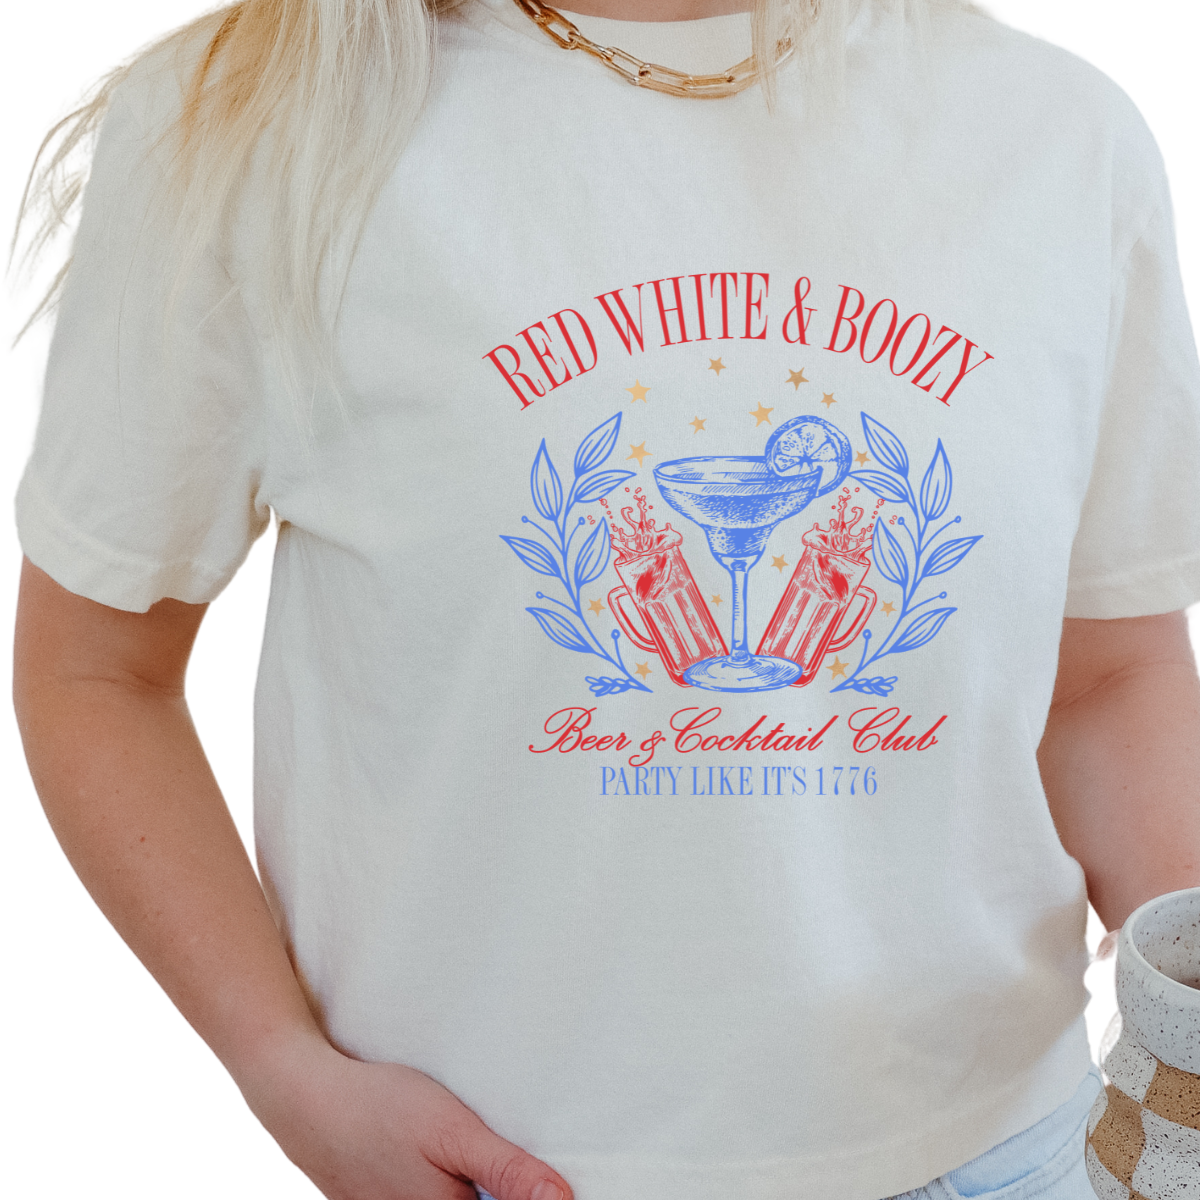 Red White & Boozy, Beer and Cocktail Club, Party Like it's 1776